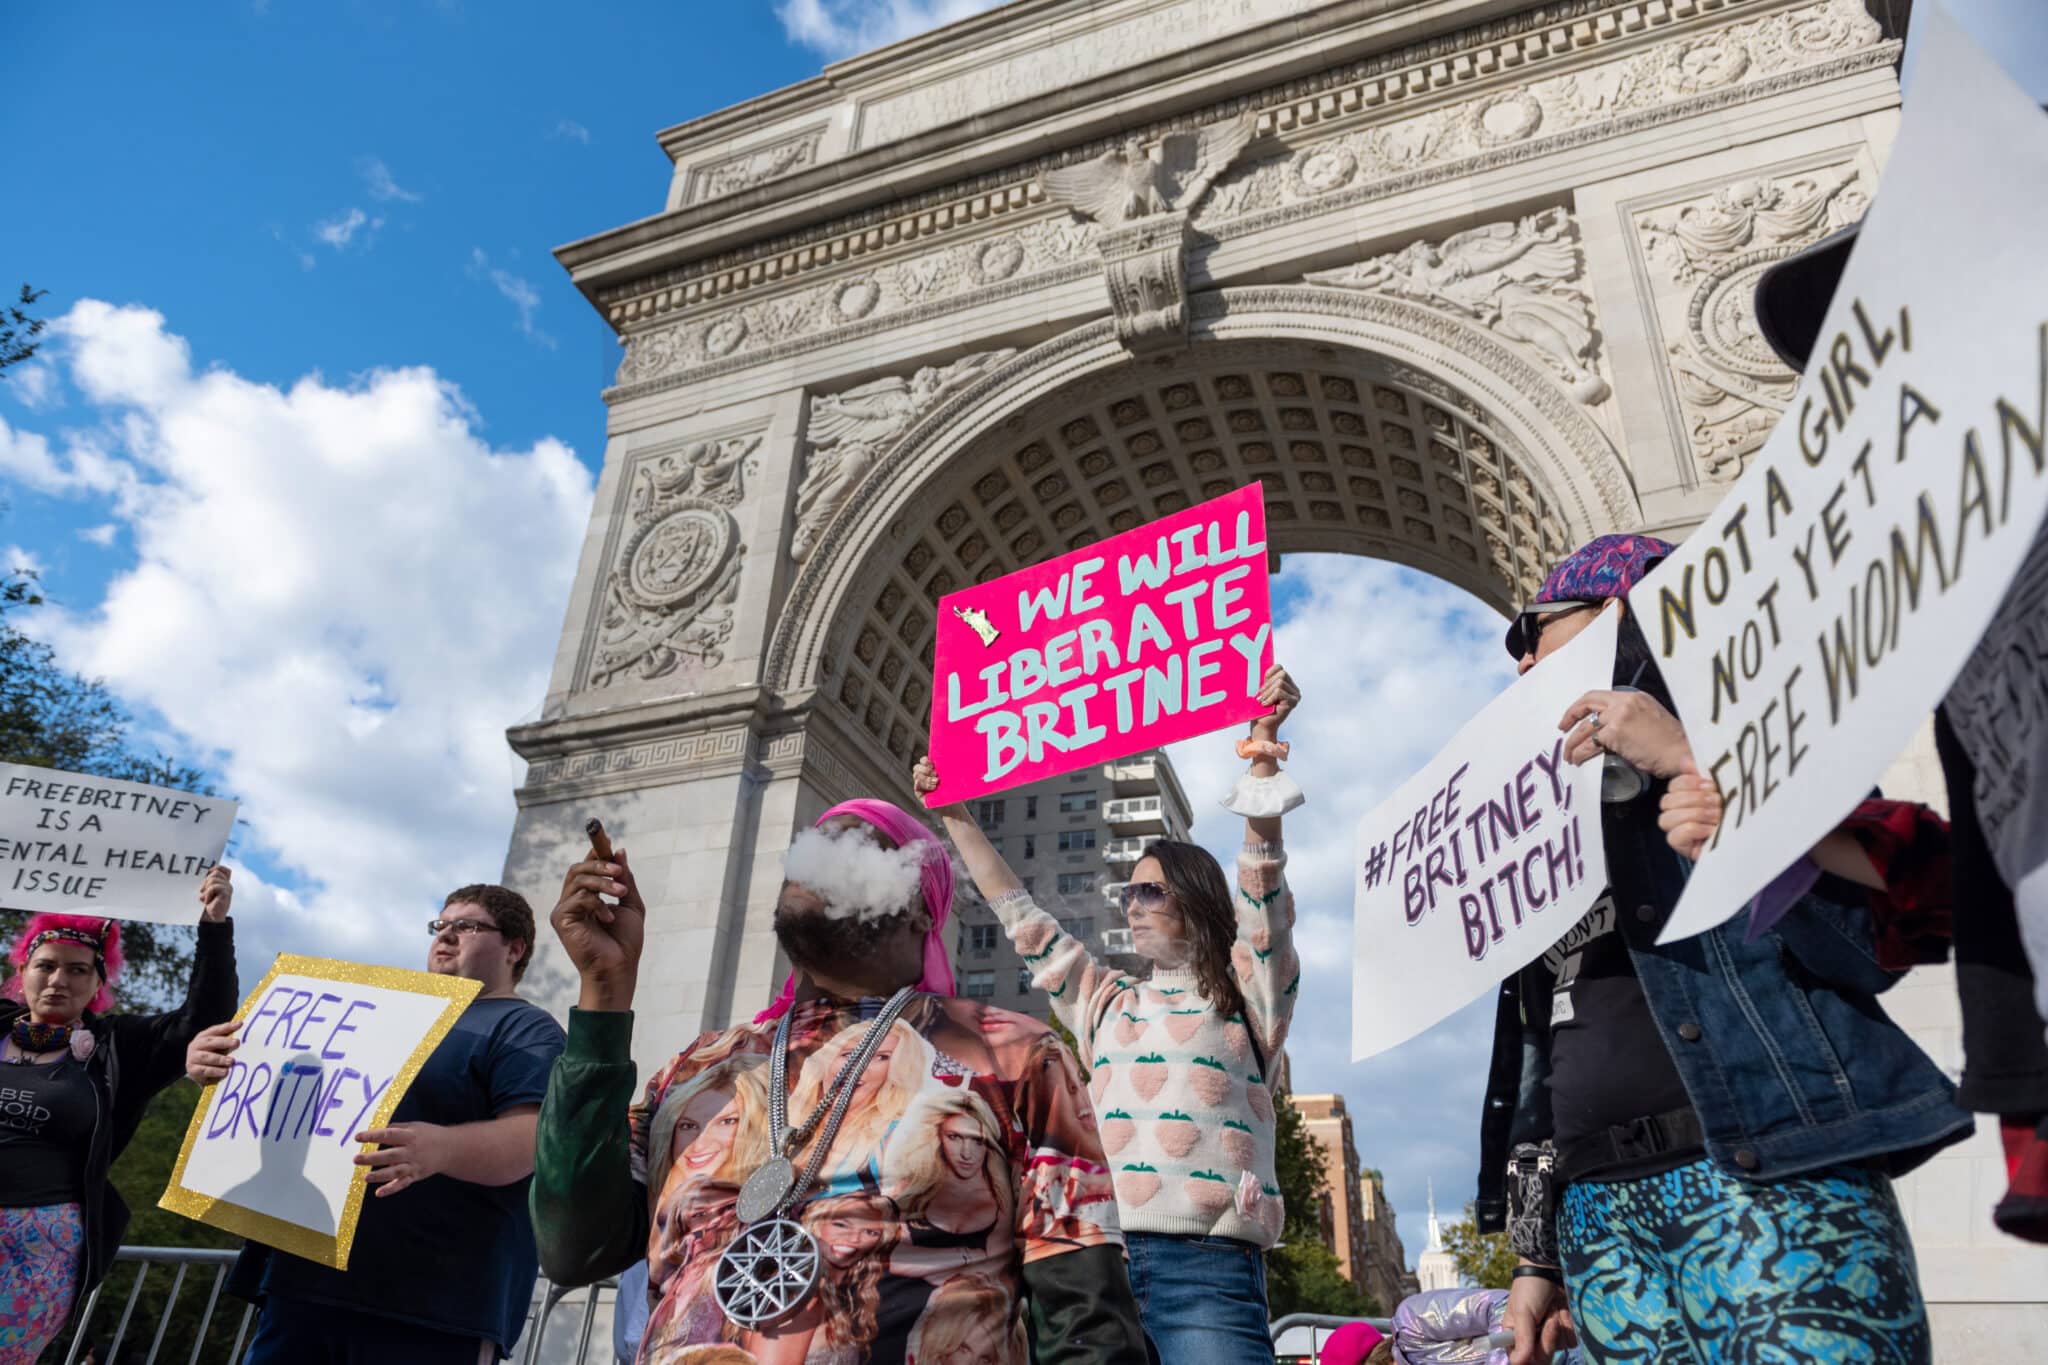 Britney Spears supporters gather to protest at the #FreeBritney Rally in New York in September 2021 